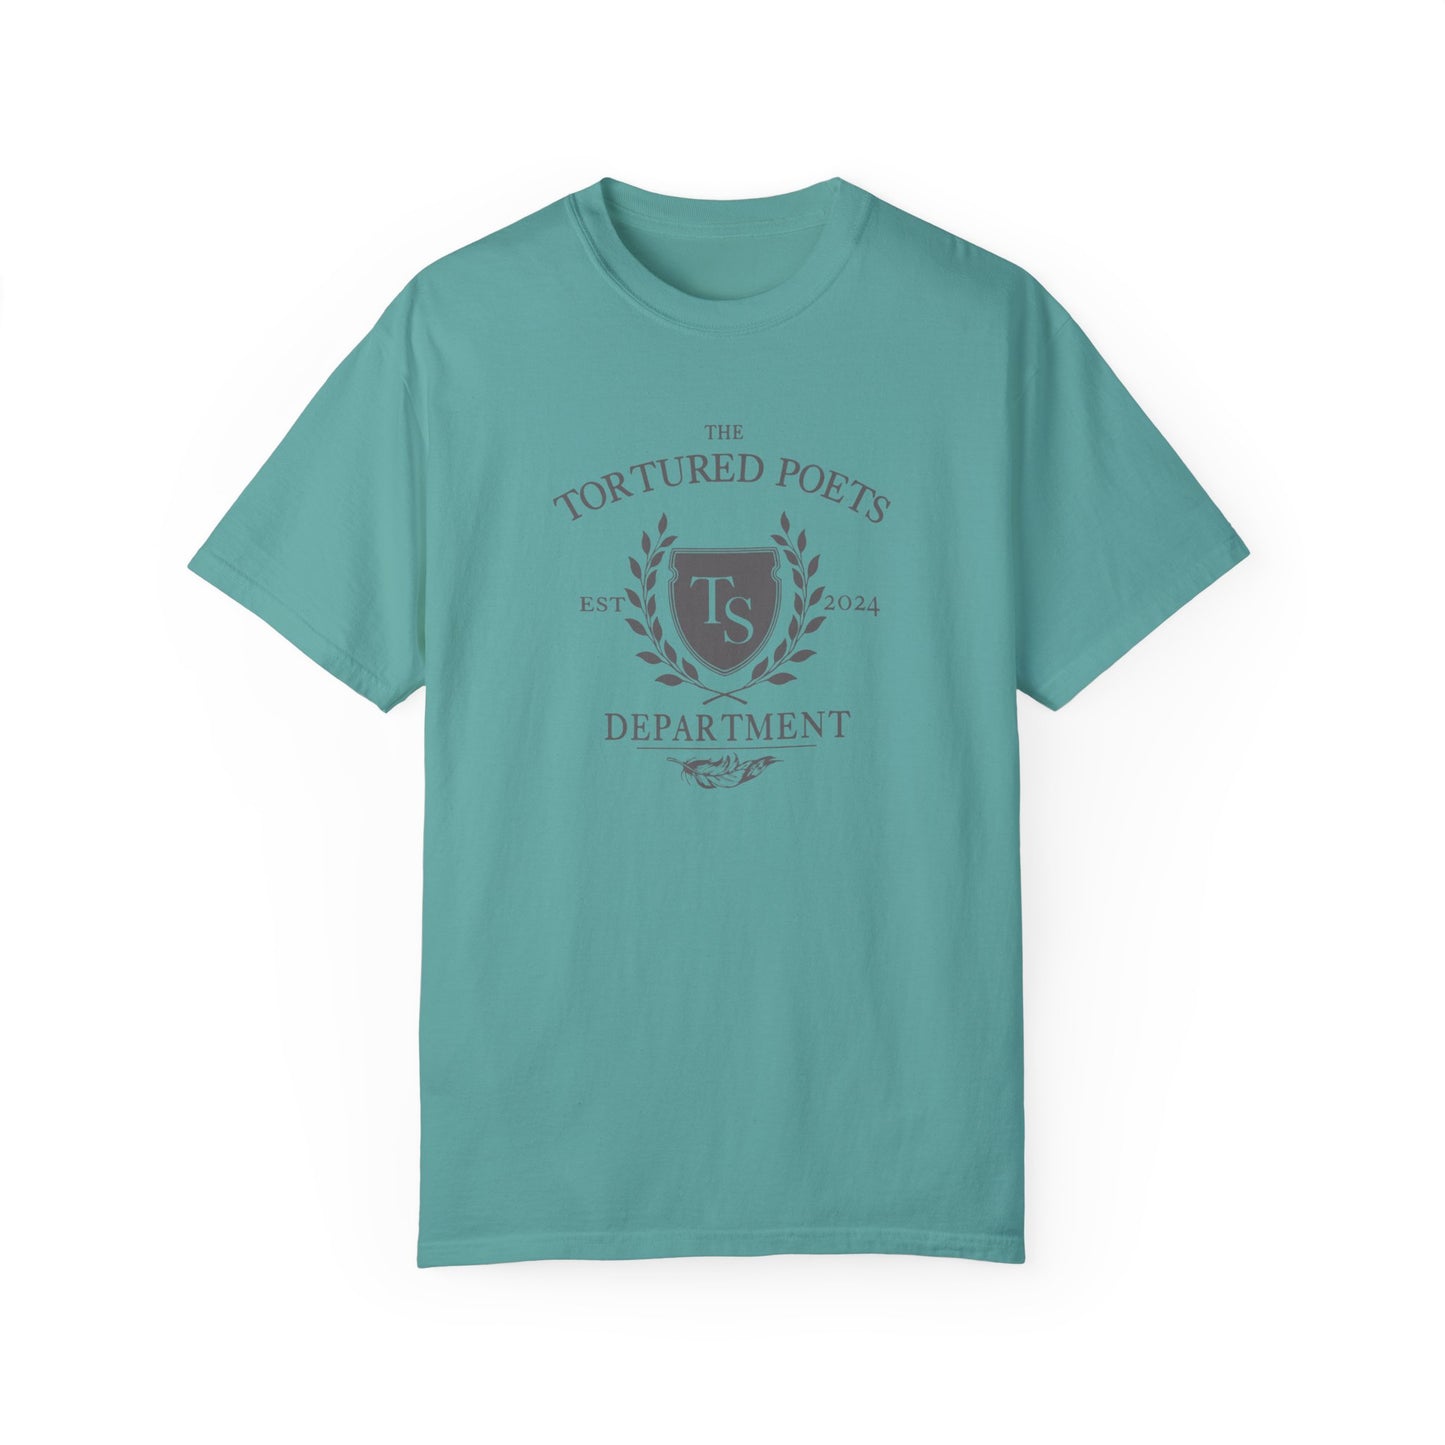 Taylor Swift 'Tortured Poets Department' Inspired T-Shirt